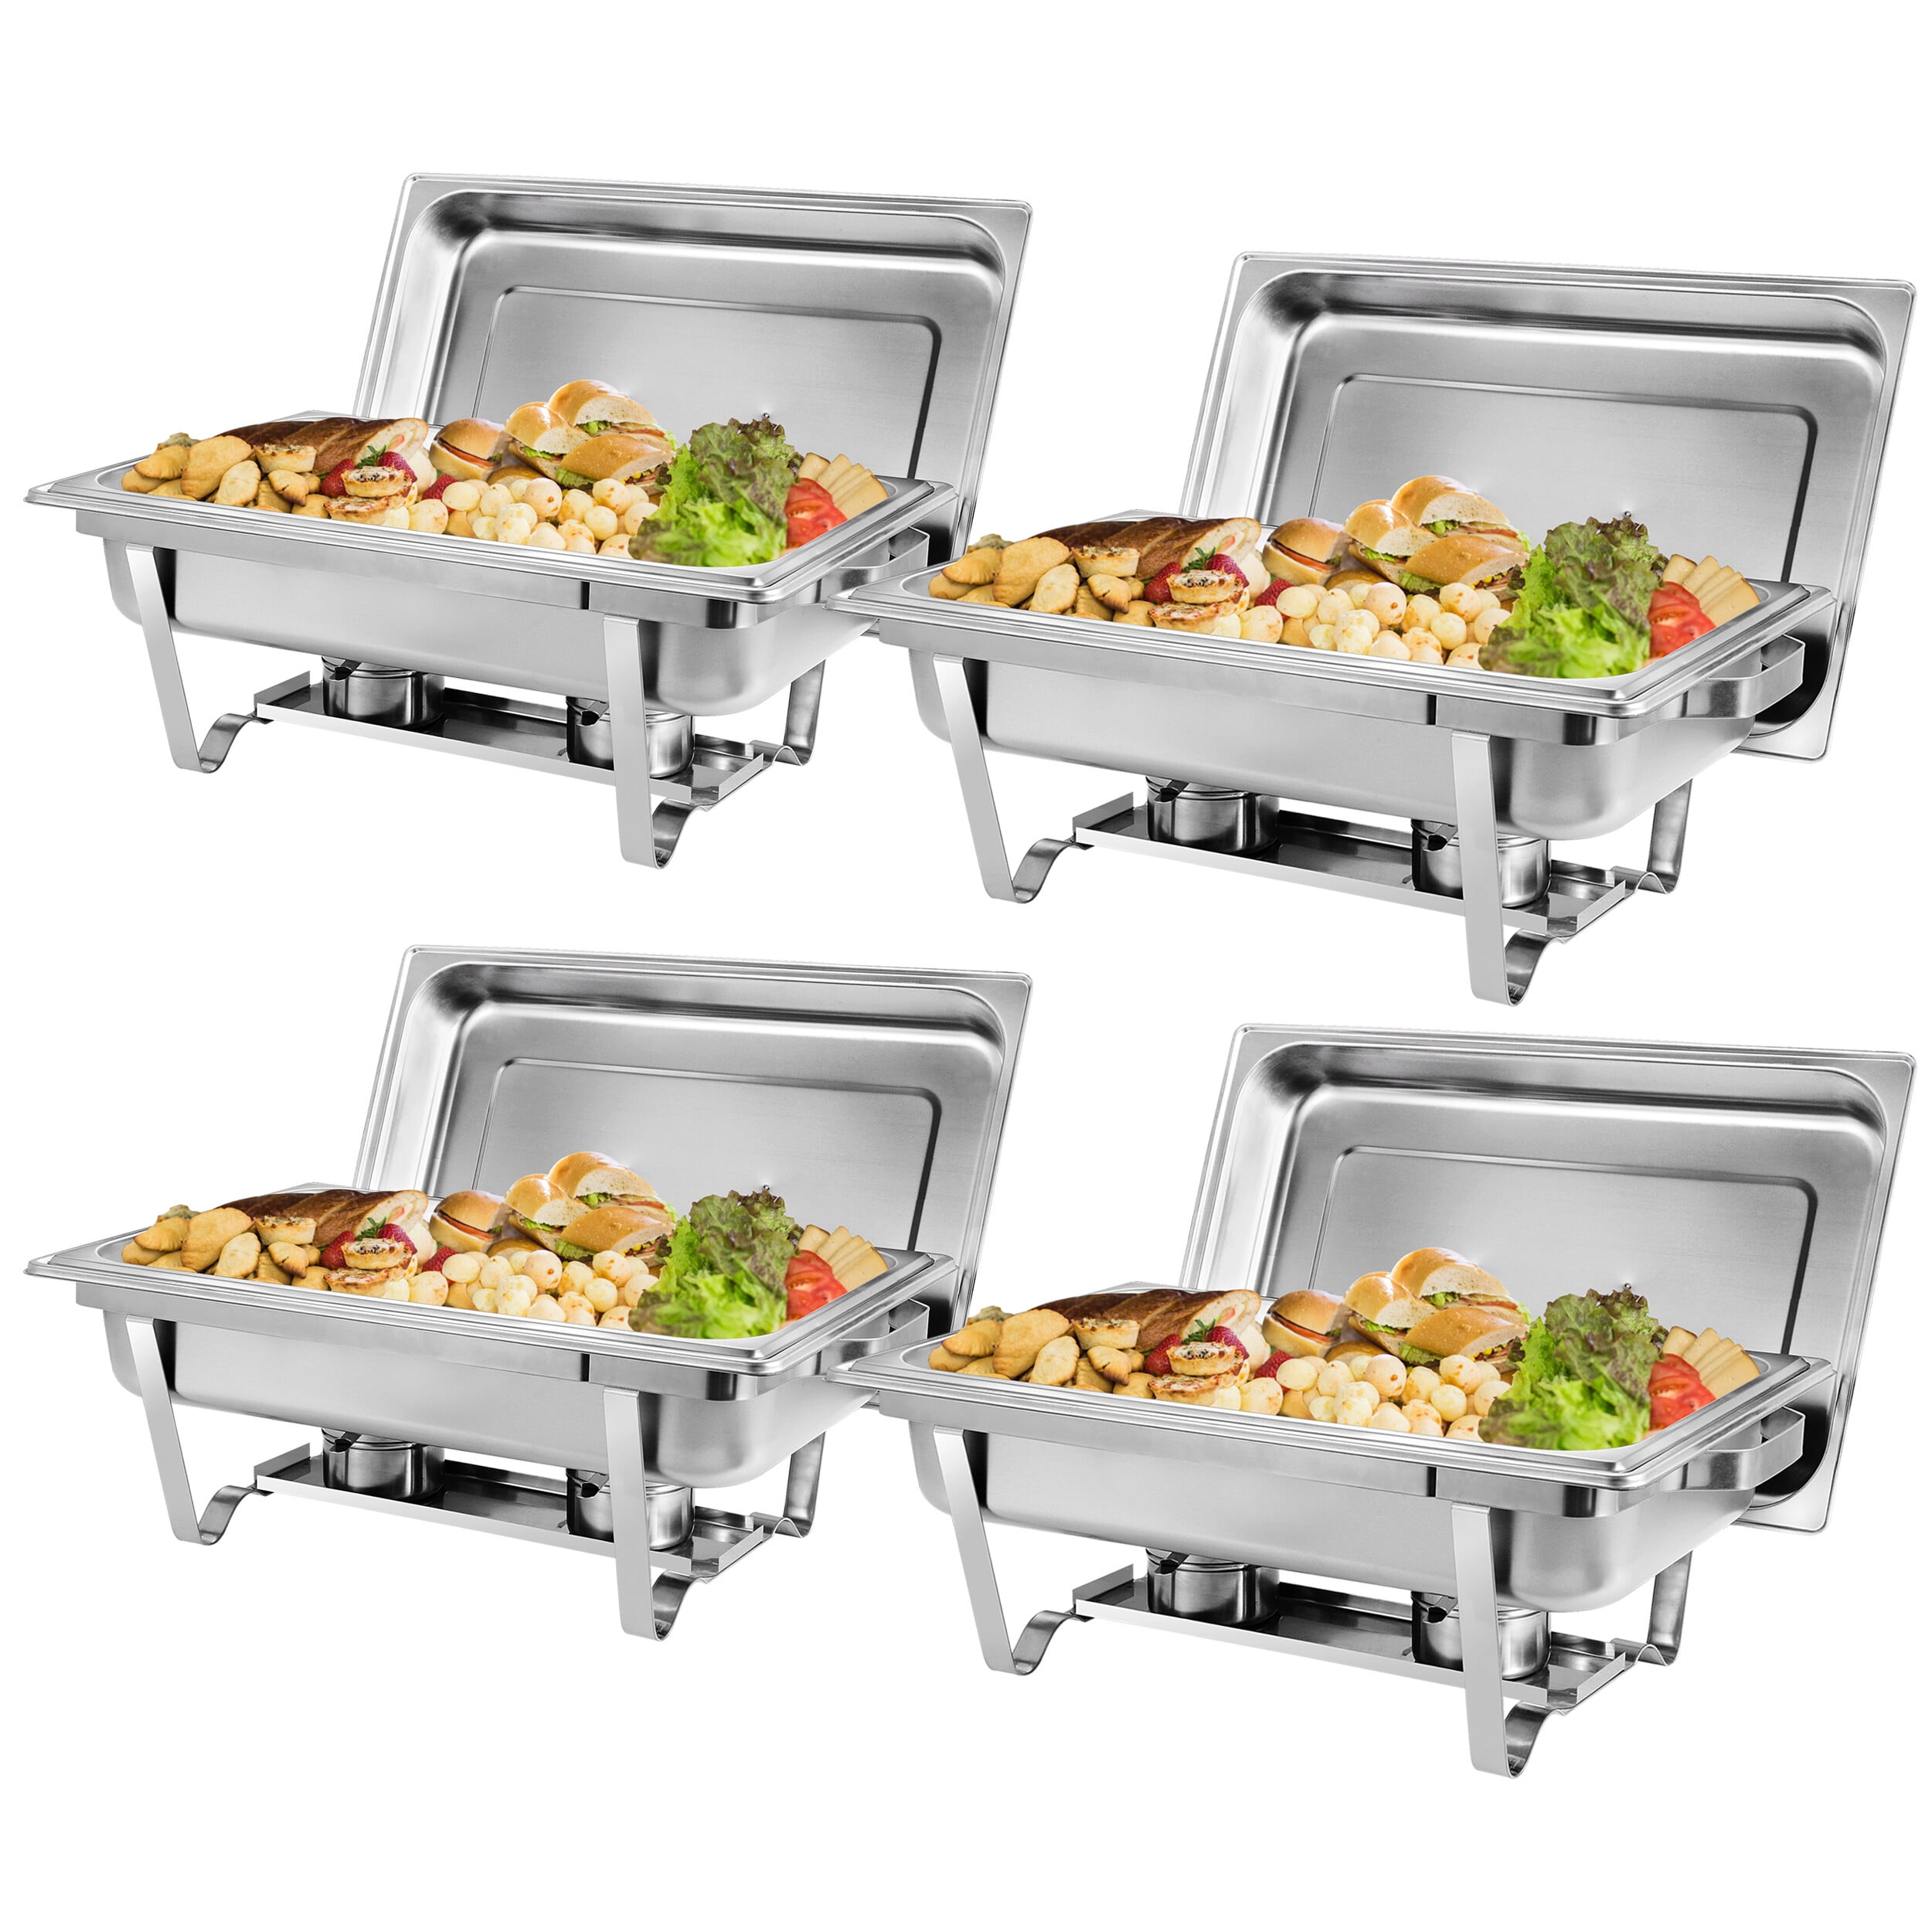 Jacgood Chafing Dish Buffet Set 2 Pack 8QT Stainless Steel Food Warmer  Chafer Complete Set with Water Pan, Chafing Fuel Holder for Party Catering